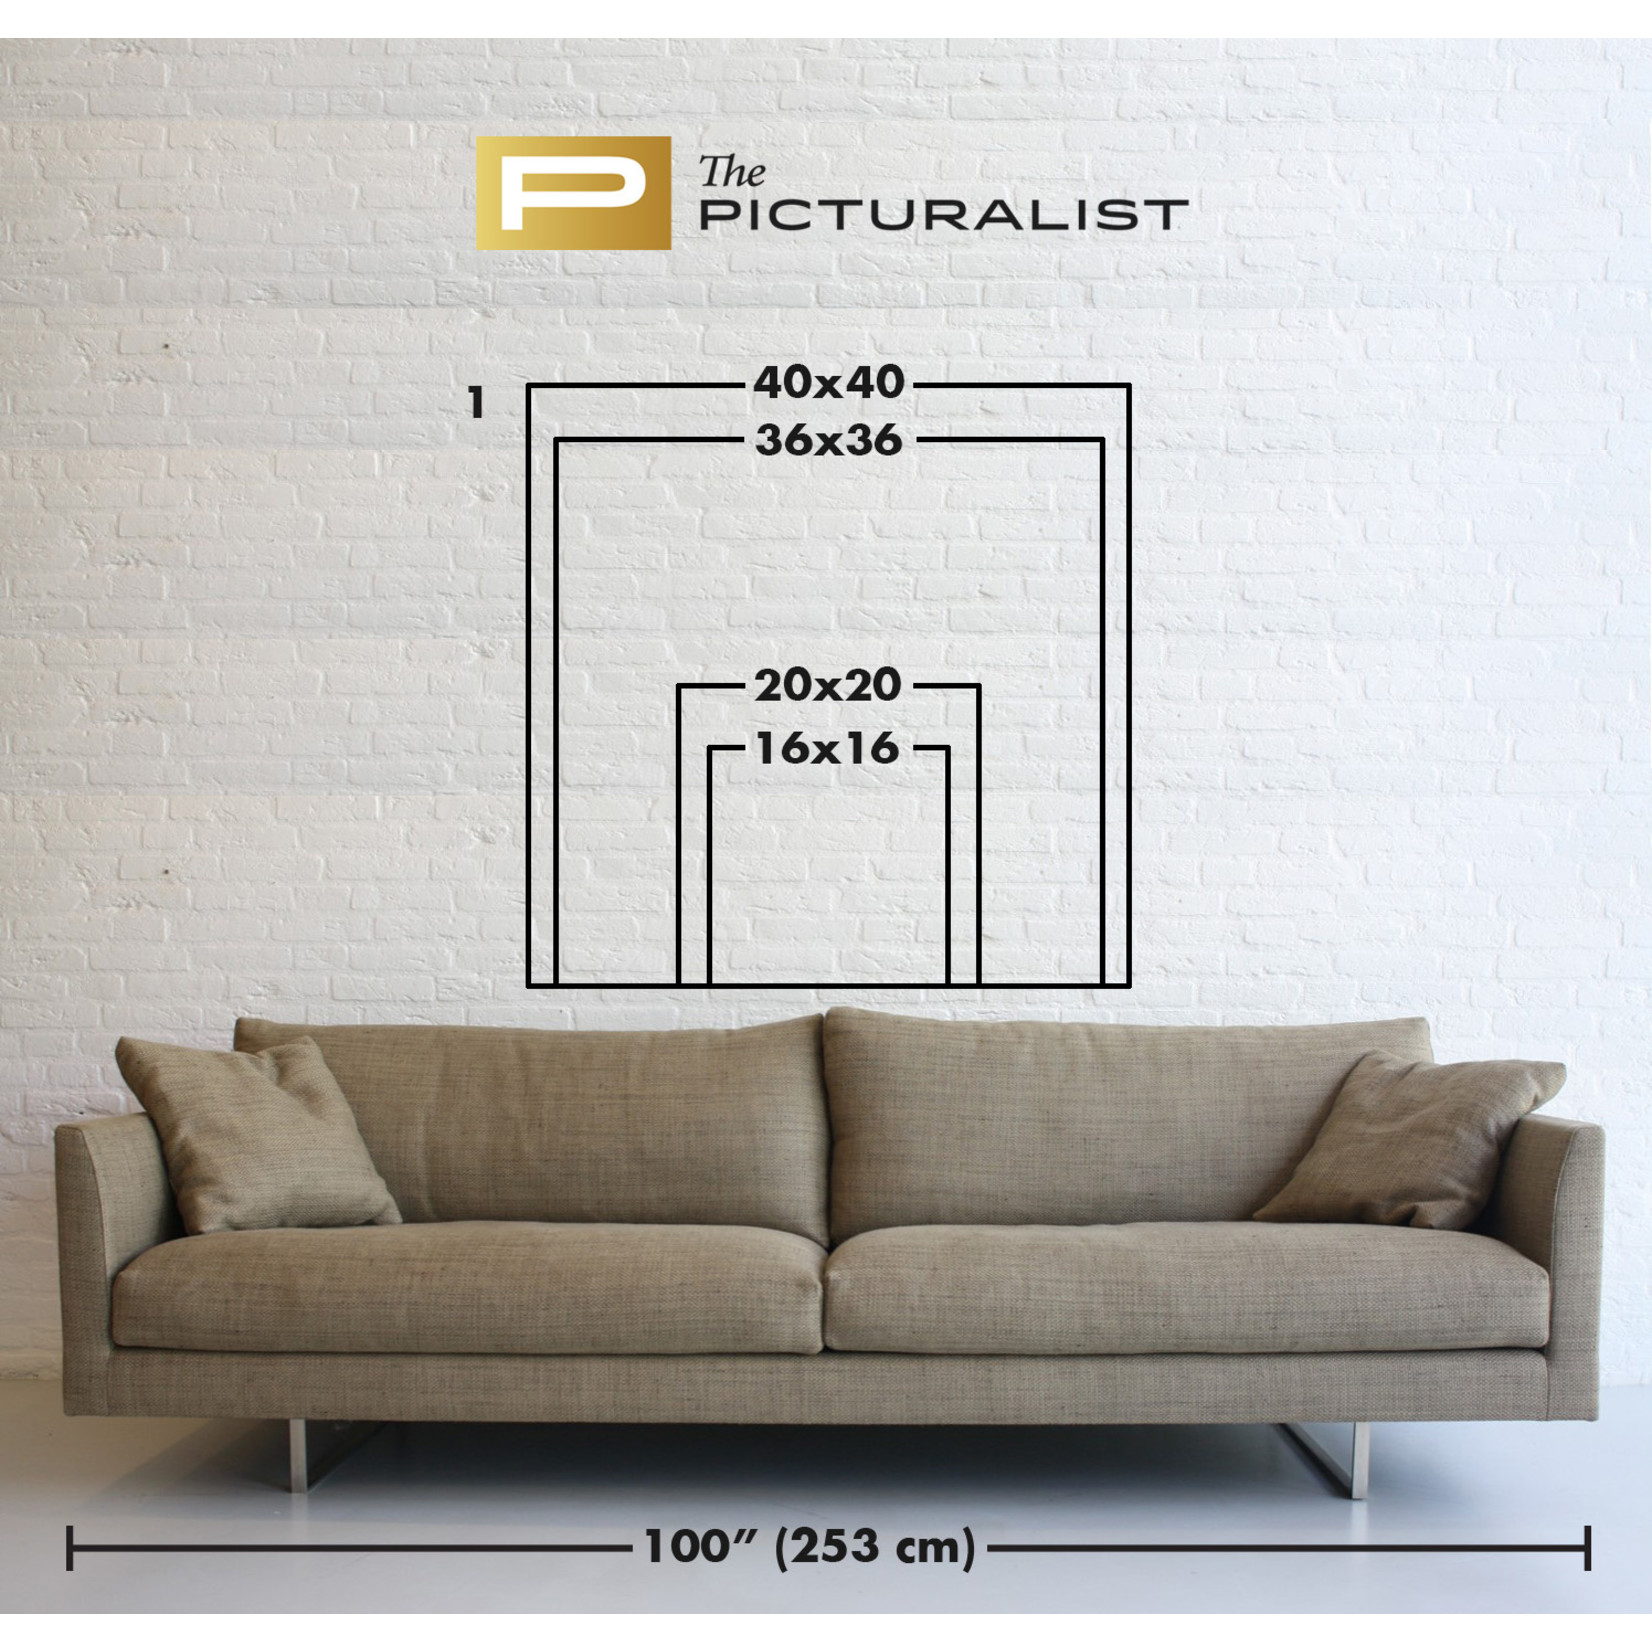 The Picturalist | Stretched Print on Canvas Assembly 01 by Rodrigo Martin